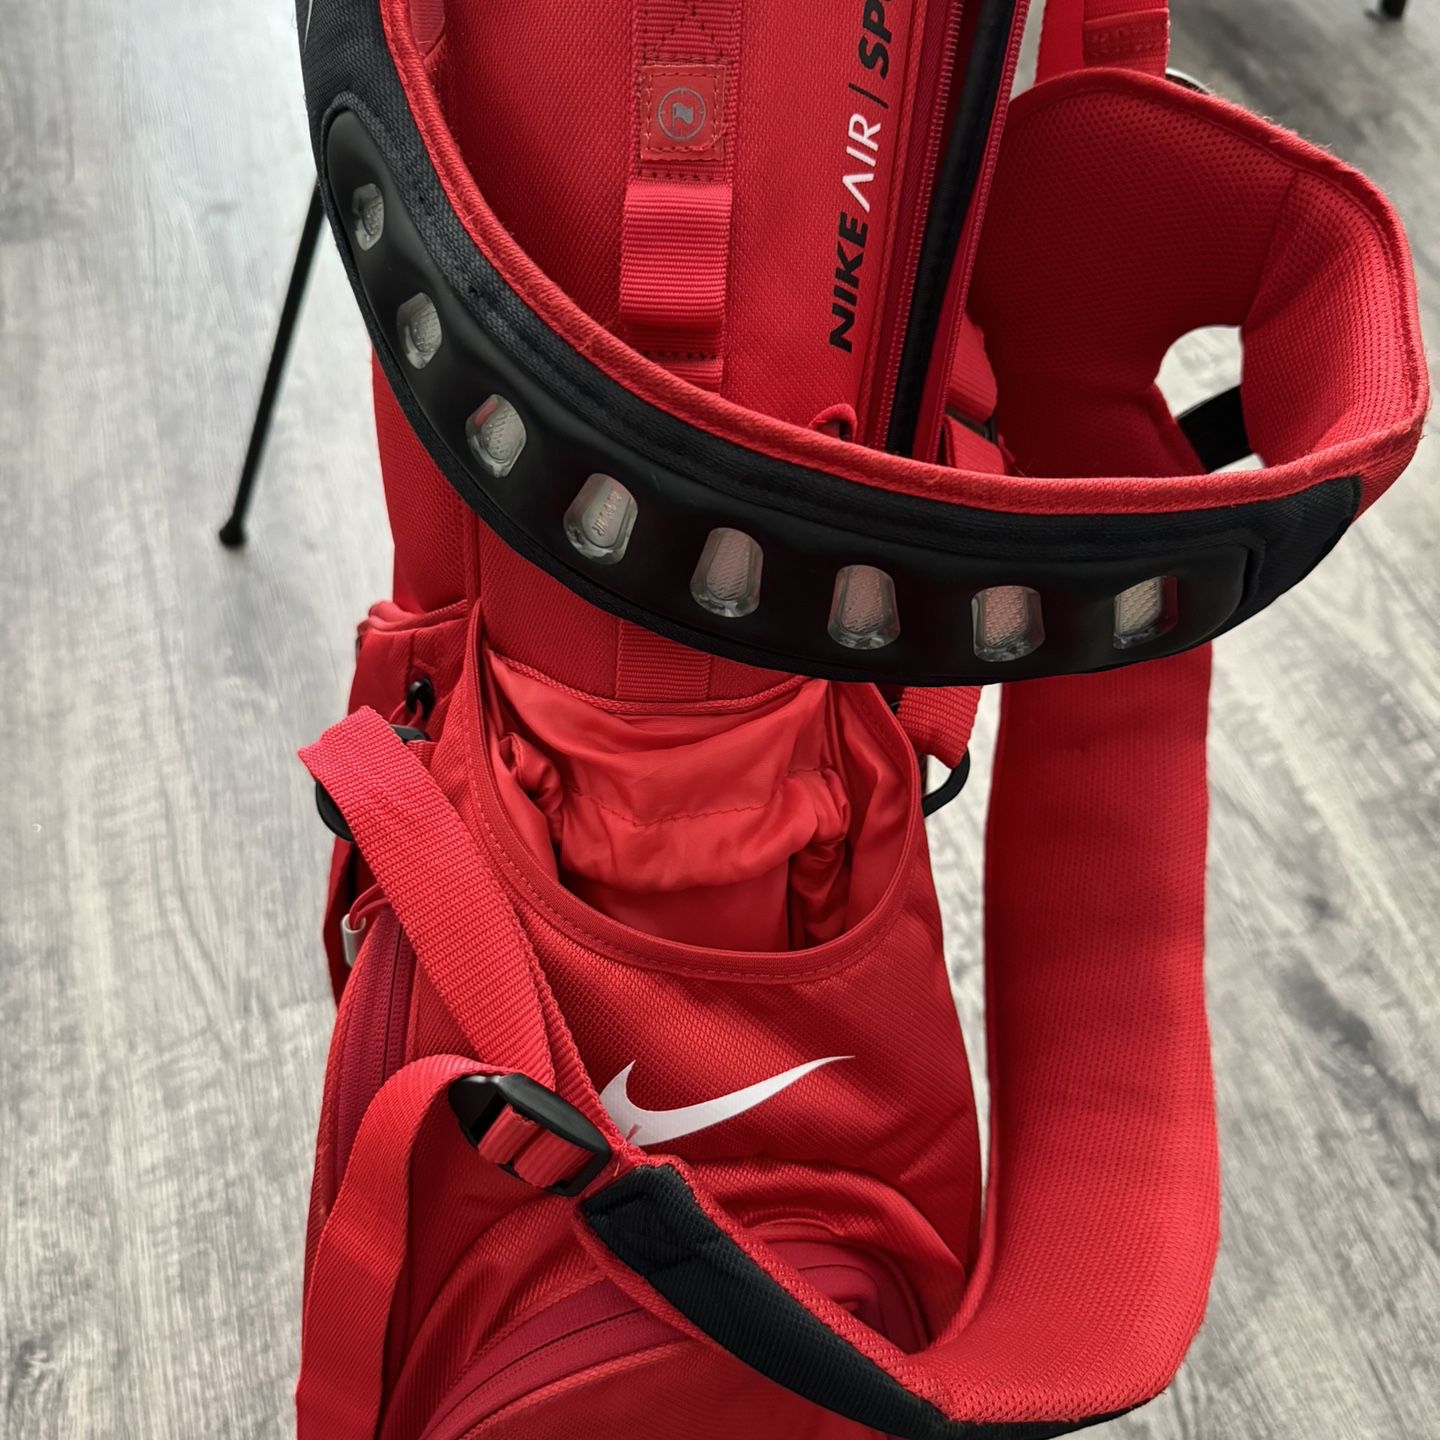 Nike Air Sport Gold Bag With Clubs 